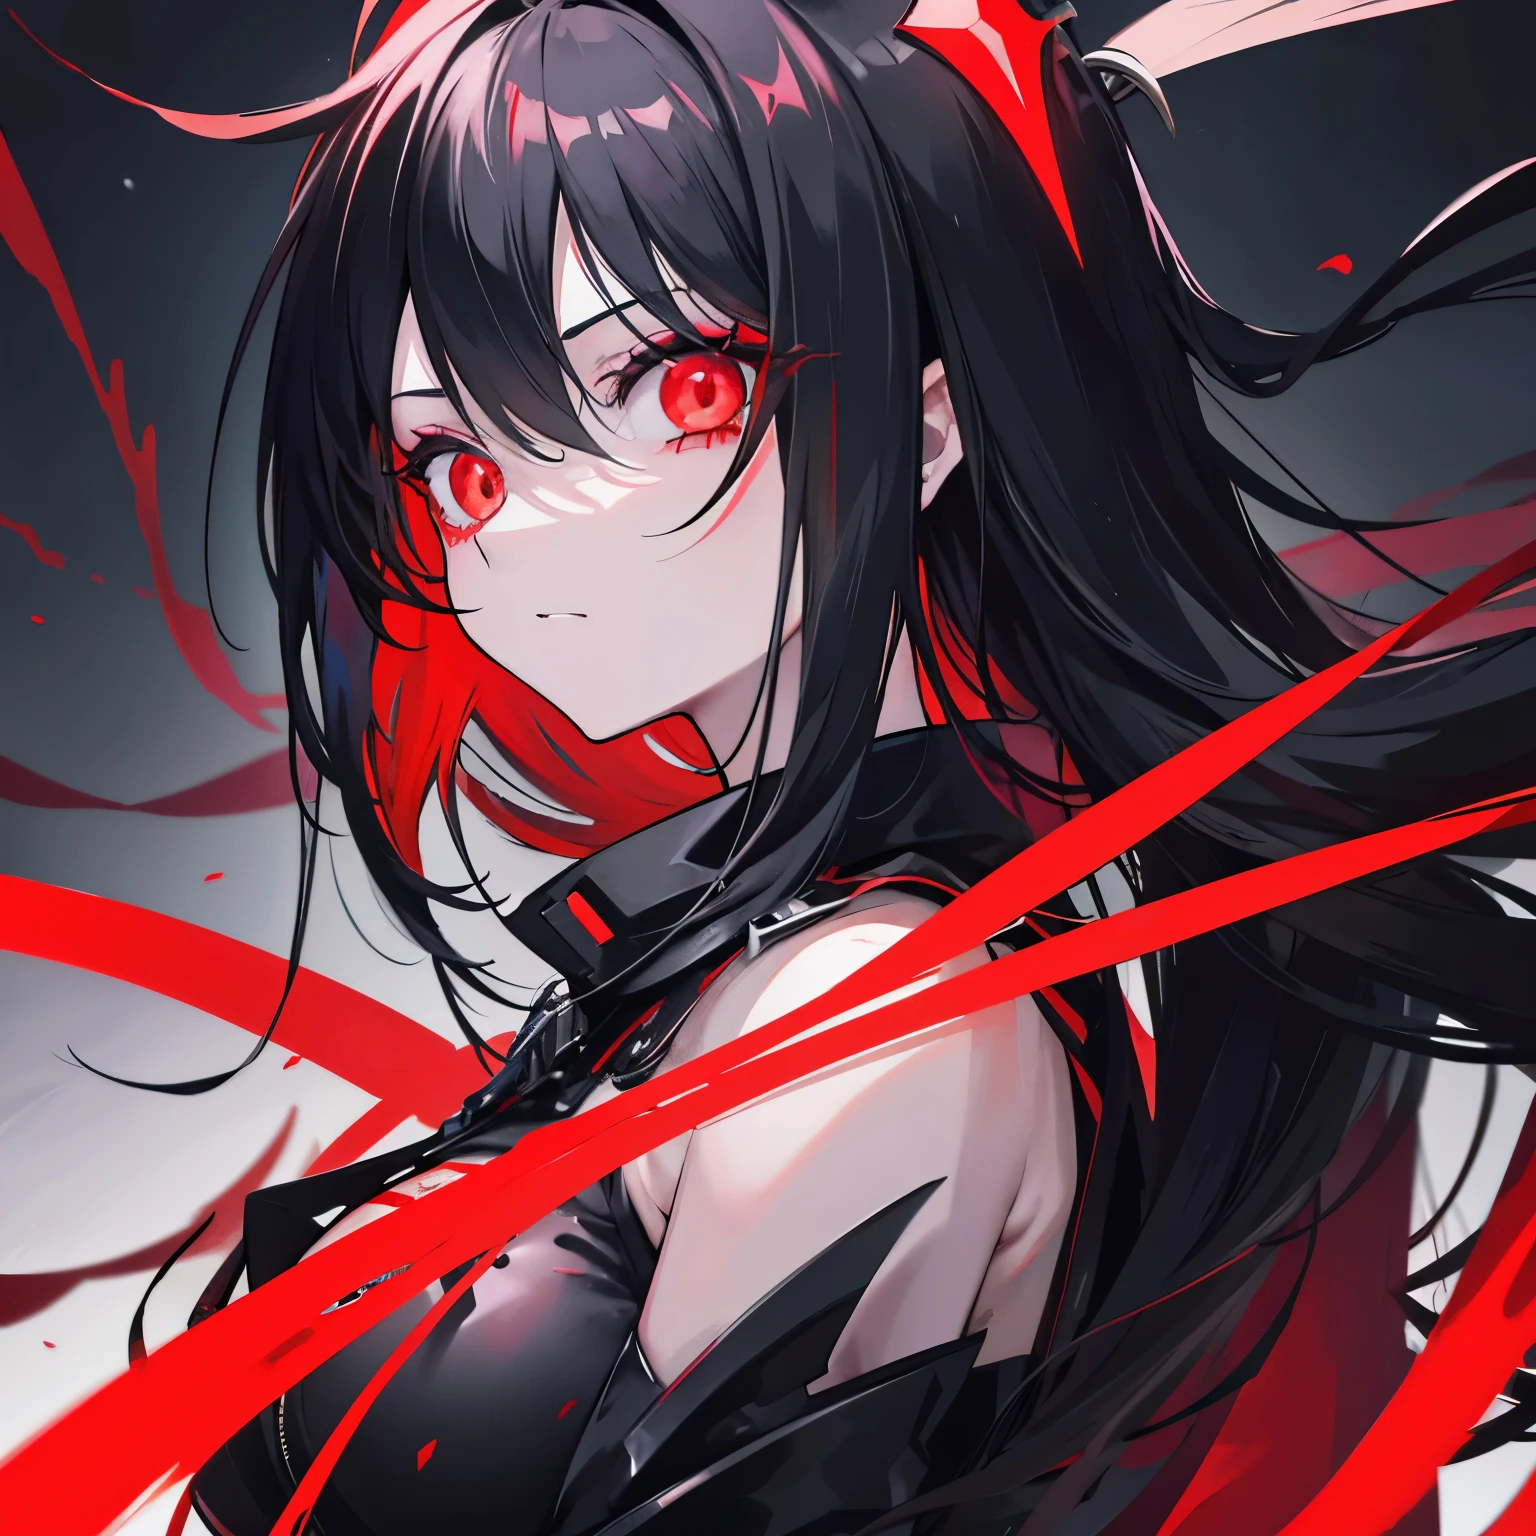 anime zombie girl with red eyes and black hair with long black hair, with glowing red eyes, anime style 4 k, with red glowing eyes, luminous red eyes, glowing red eyes, red eyes glowing, black anime pupils in her eyes, anime style. 8k, red glowing eyes, 4k anime wallpaper, anime zombie girl, bright red eyes, bloody, badass anime 8 k, close up1:1